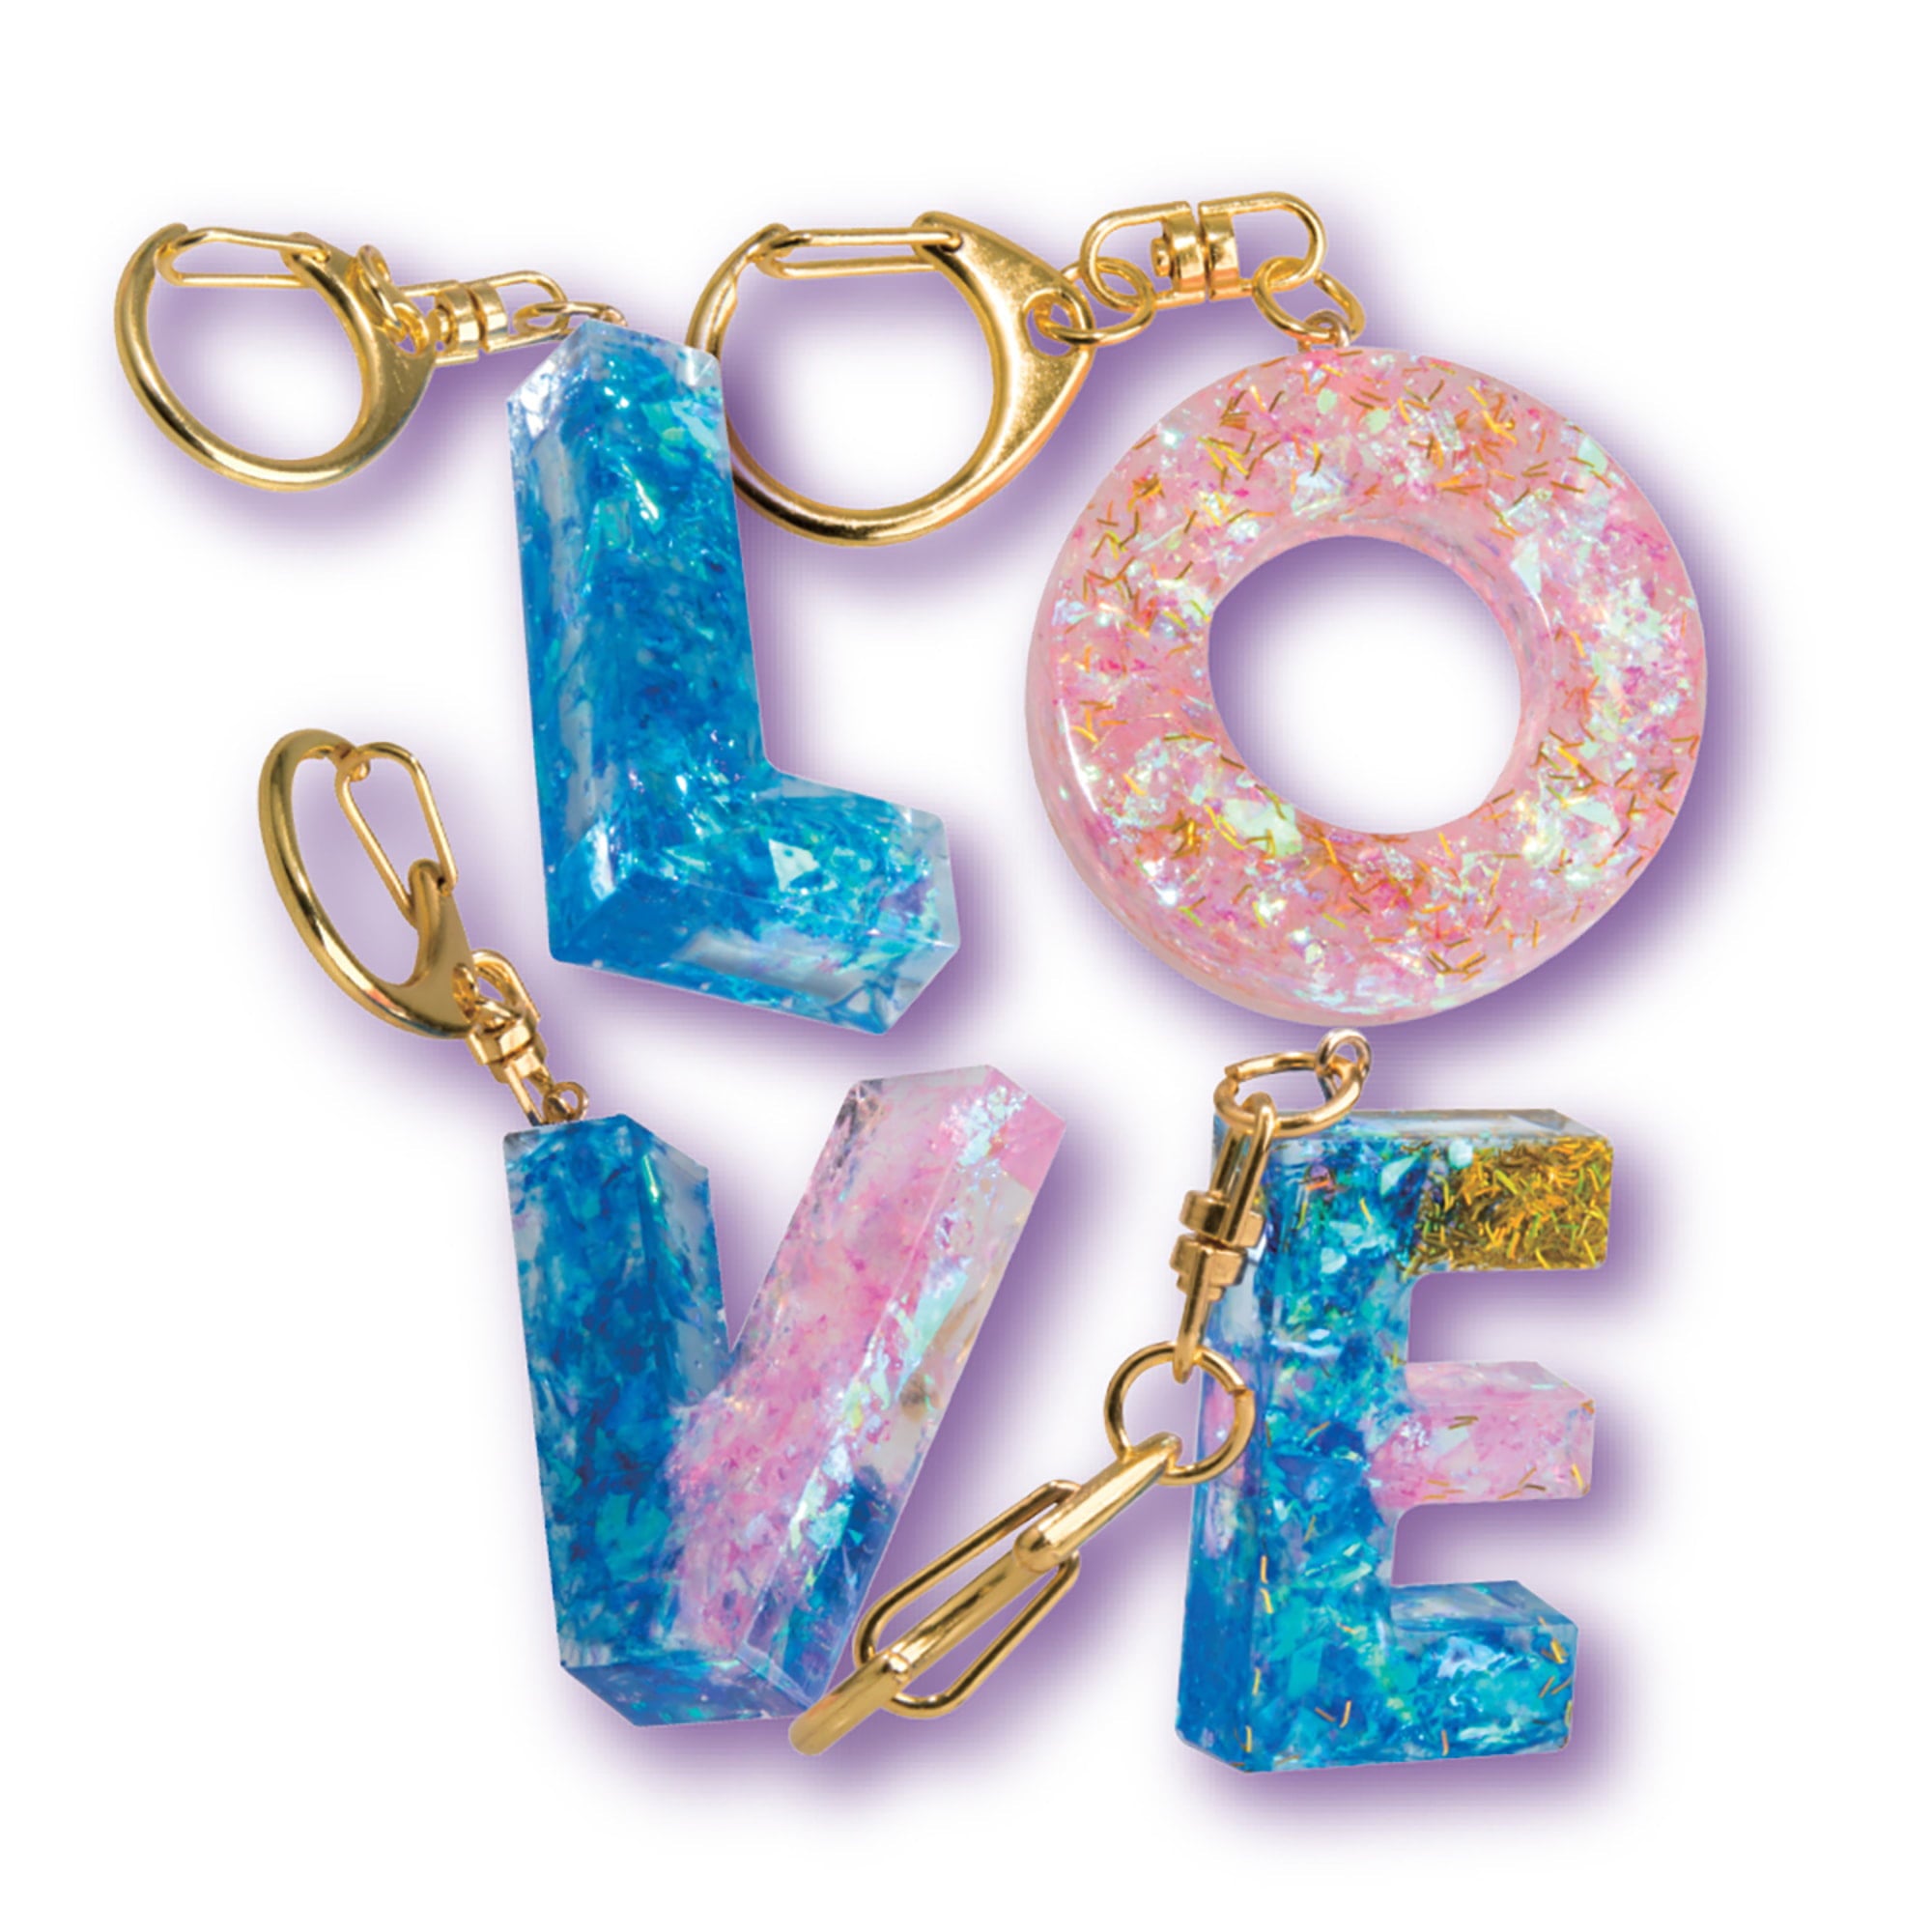 AMAV Fashion Time Love Crystal Key Chain Making Kit, Makes 4 Beautiful  Key Chains with Sparkling